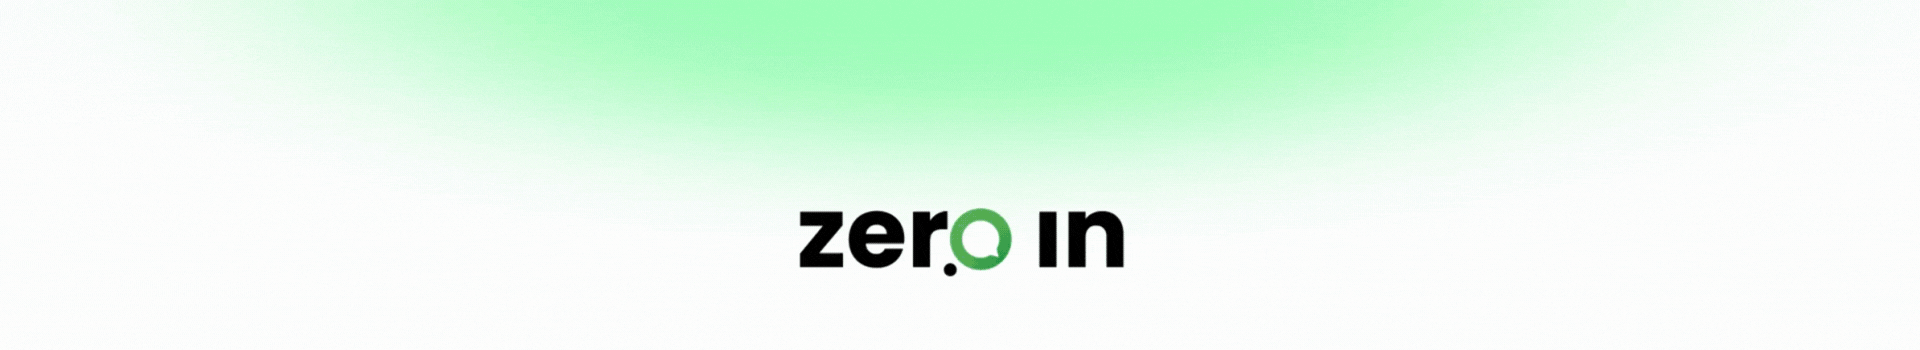 ZeroIn Web Header (Resized and Redesigned)